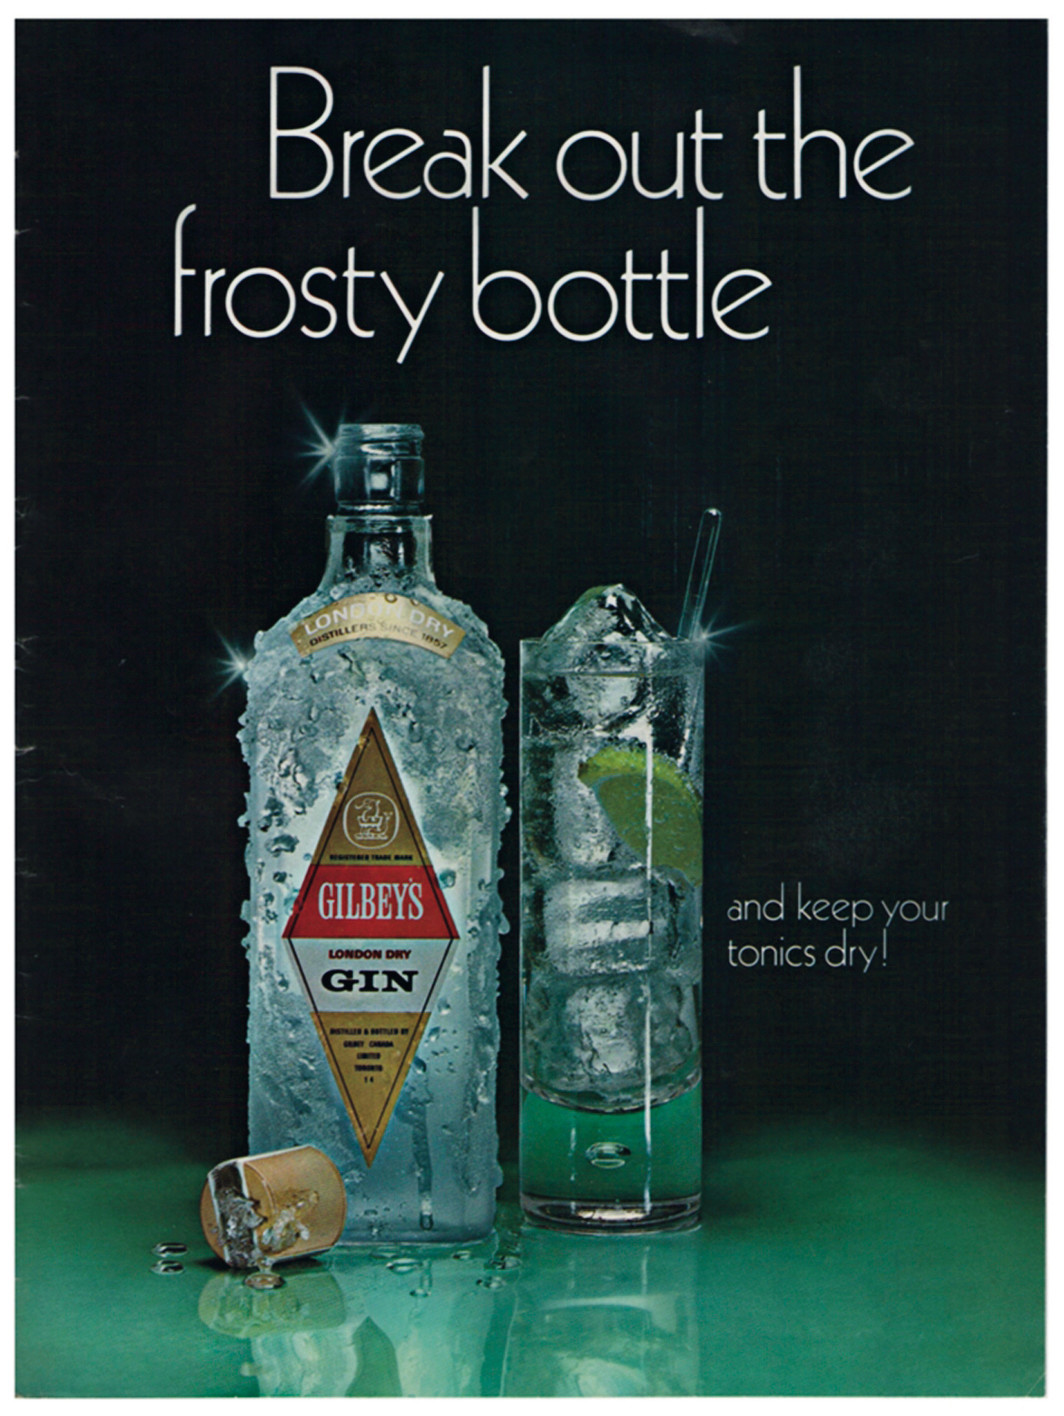 Gilbey's London Dry Gin advertisement, 1971.